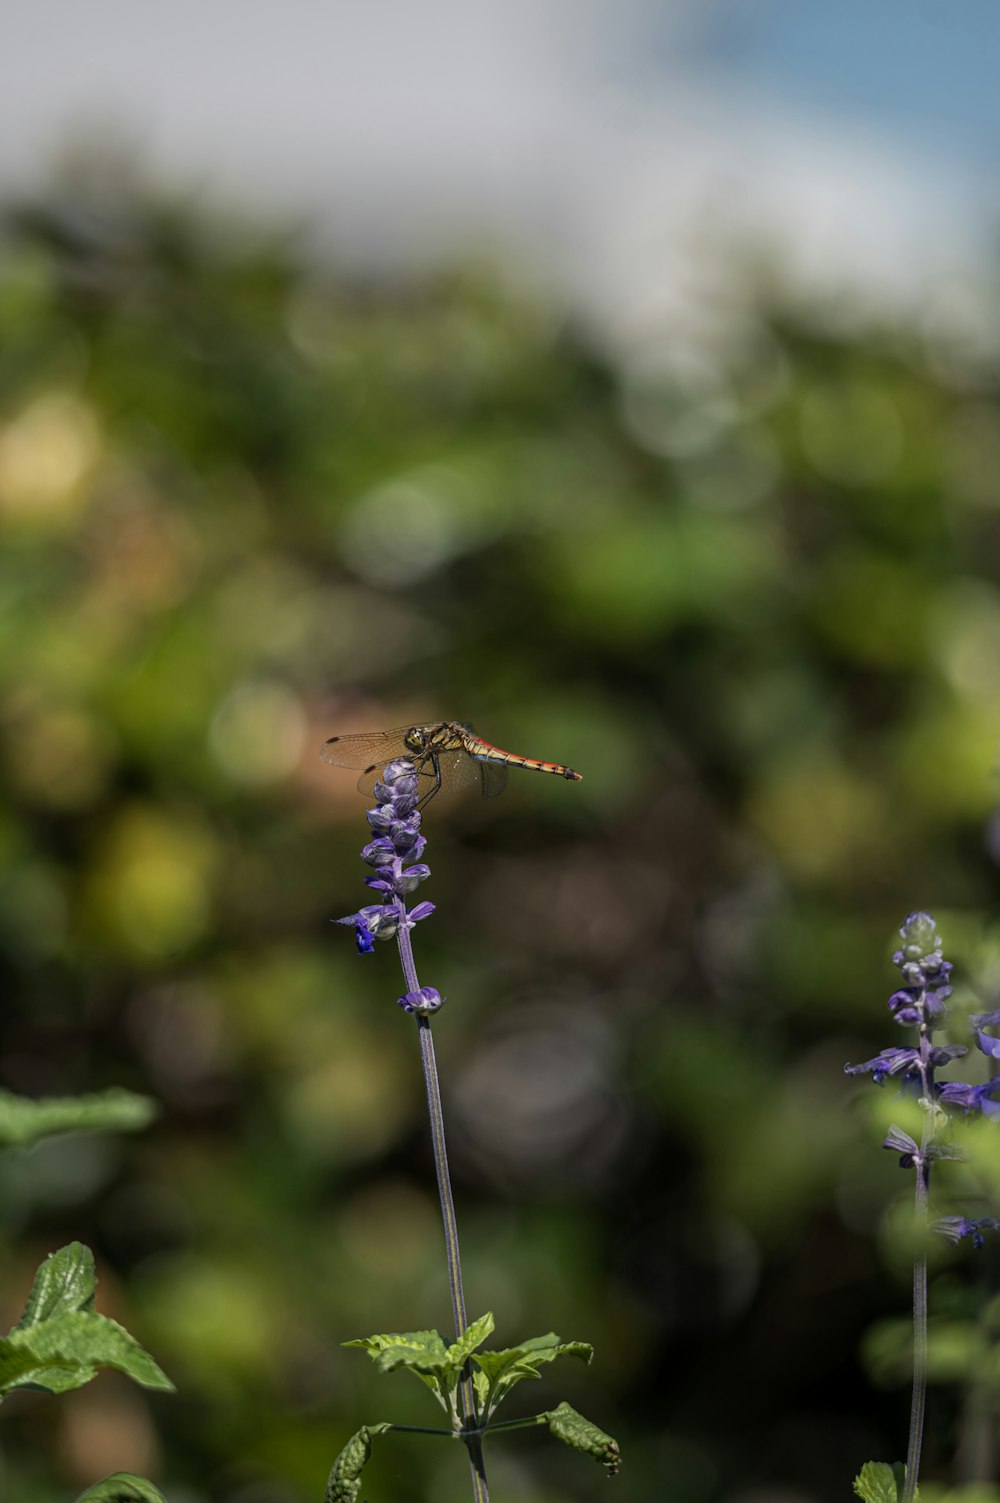 a small insect flying over a purple flower